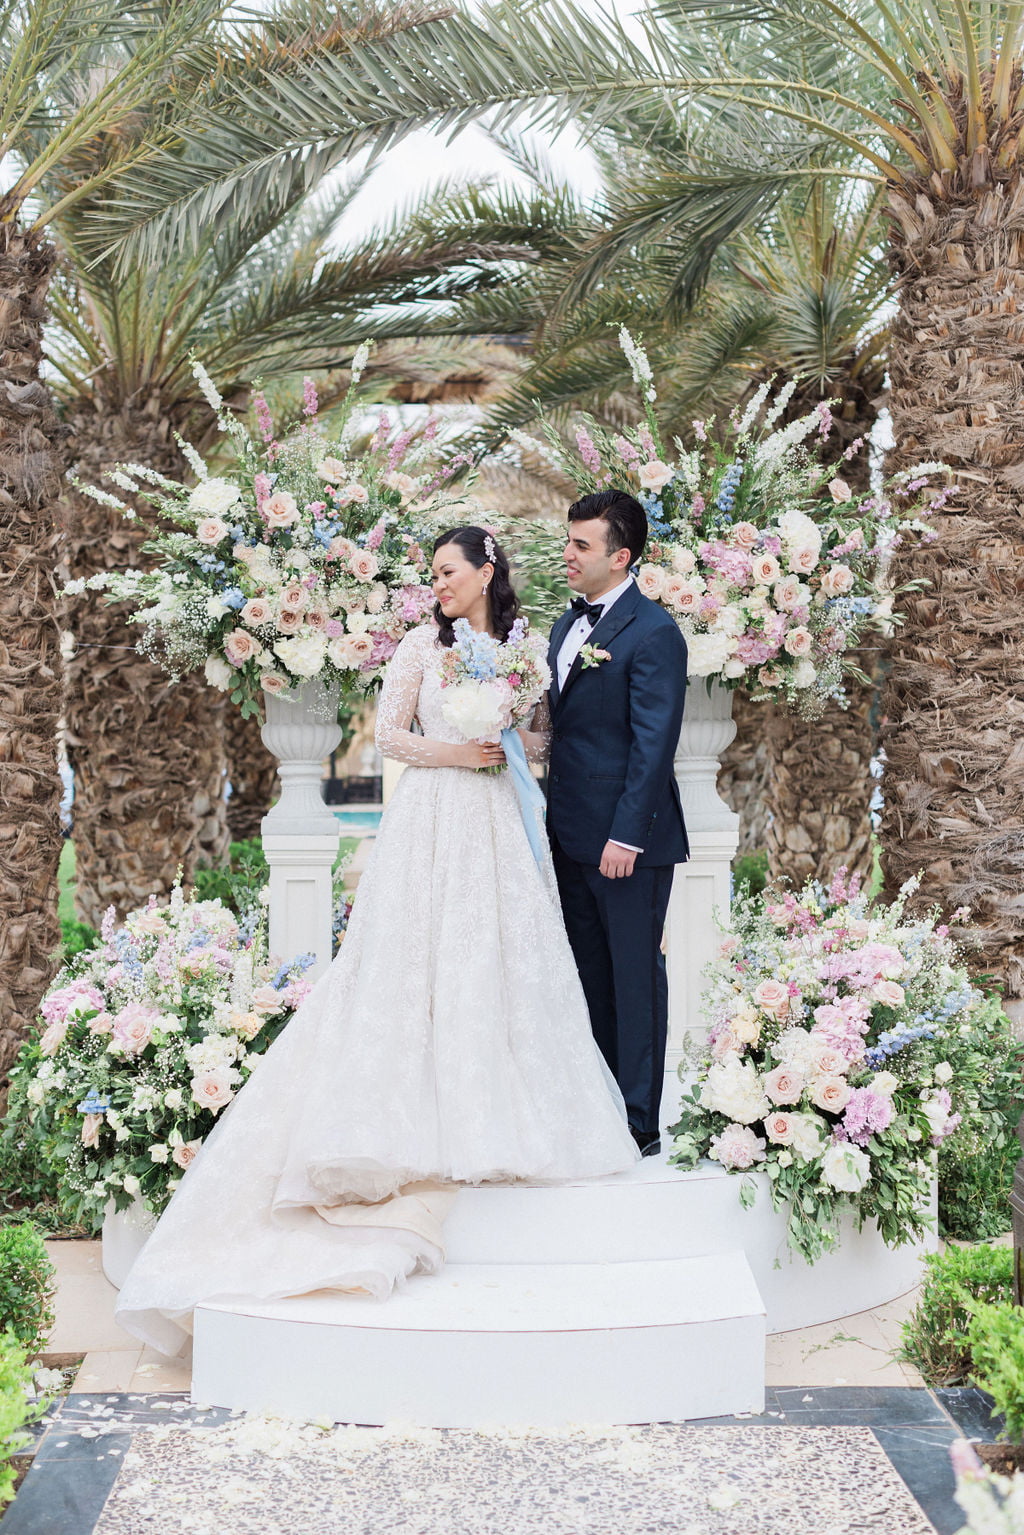 The bride and groom portraits outside of their luxury Marrakech wedding venue